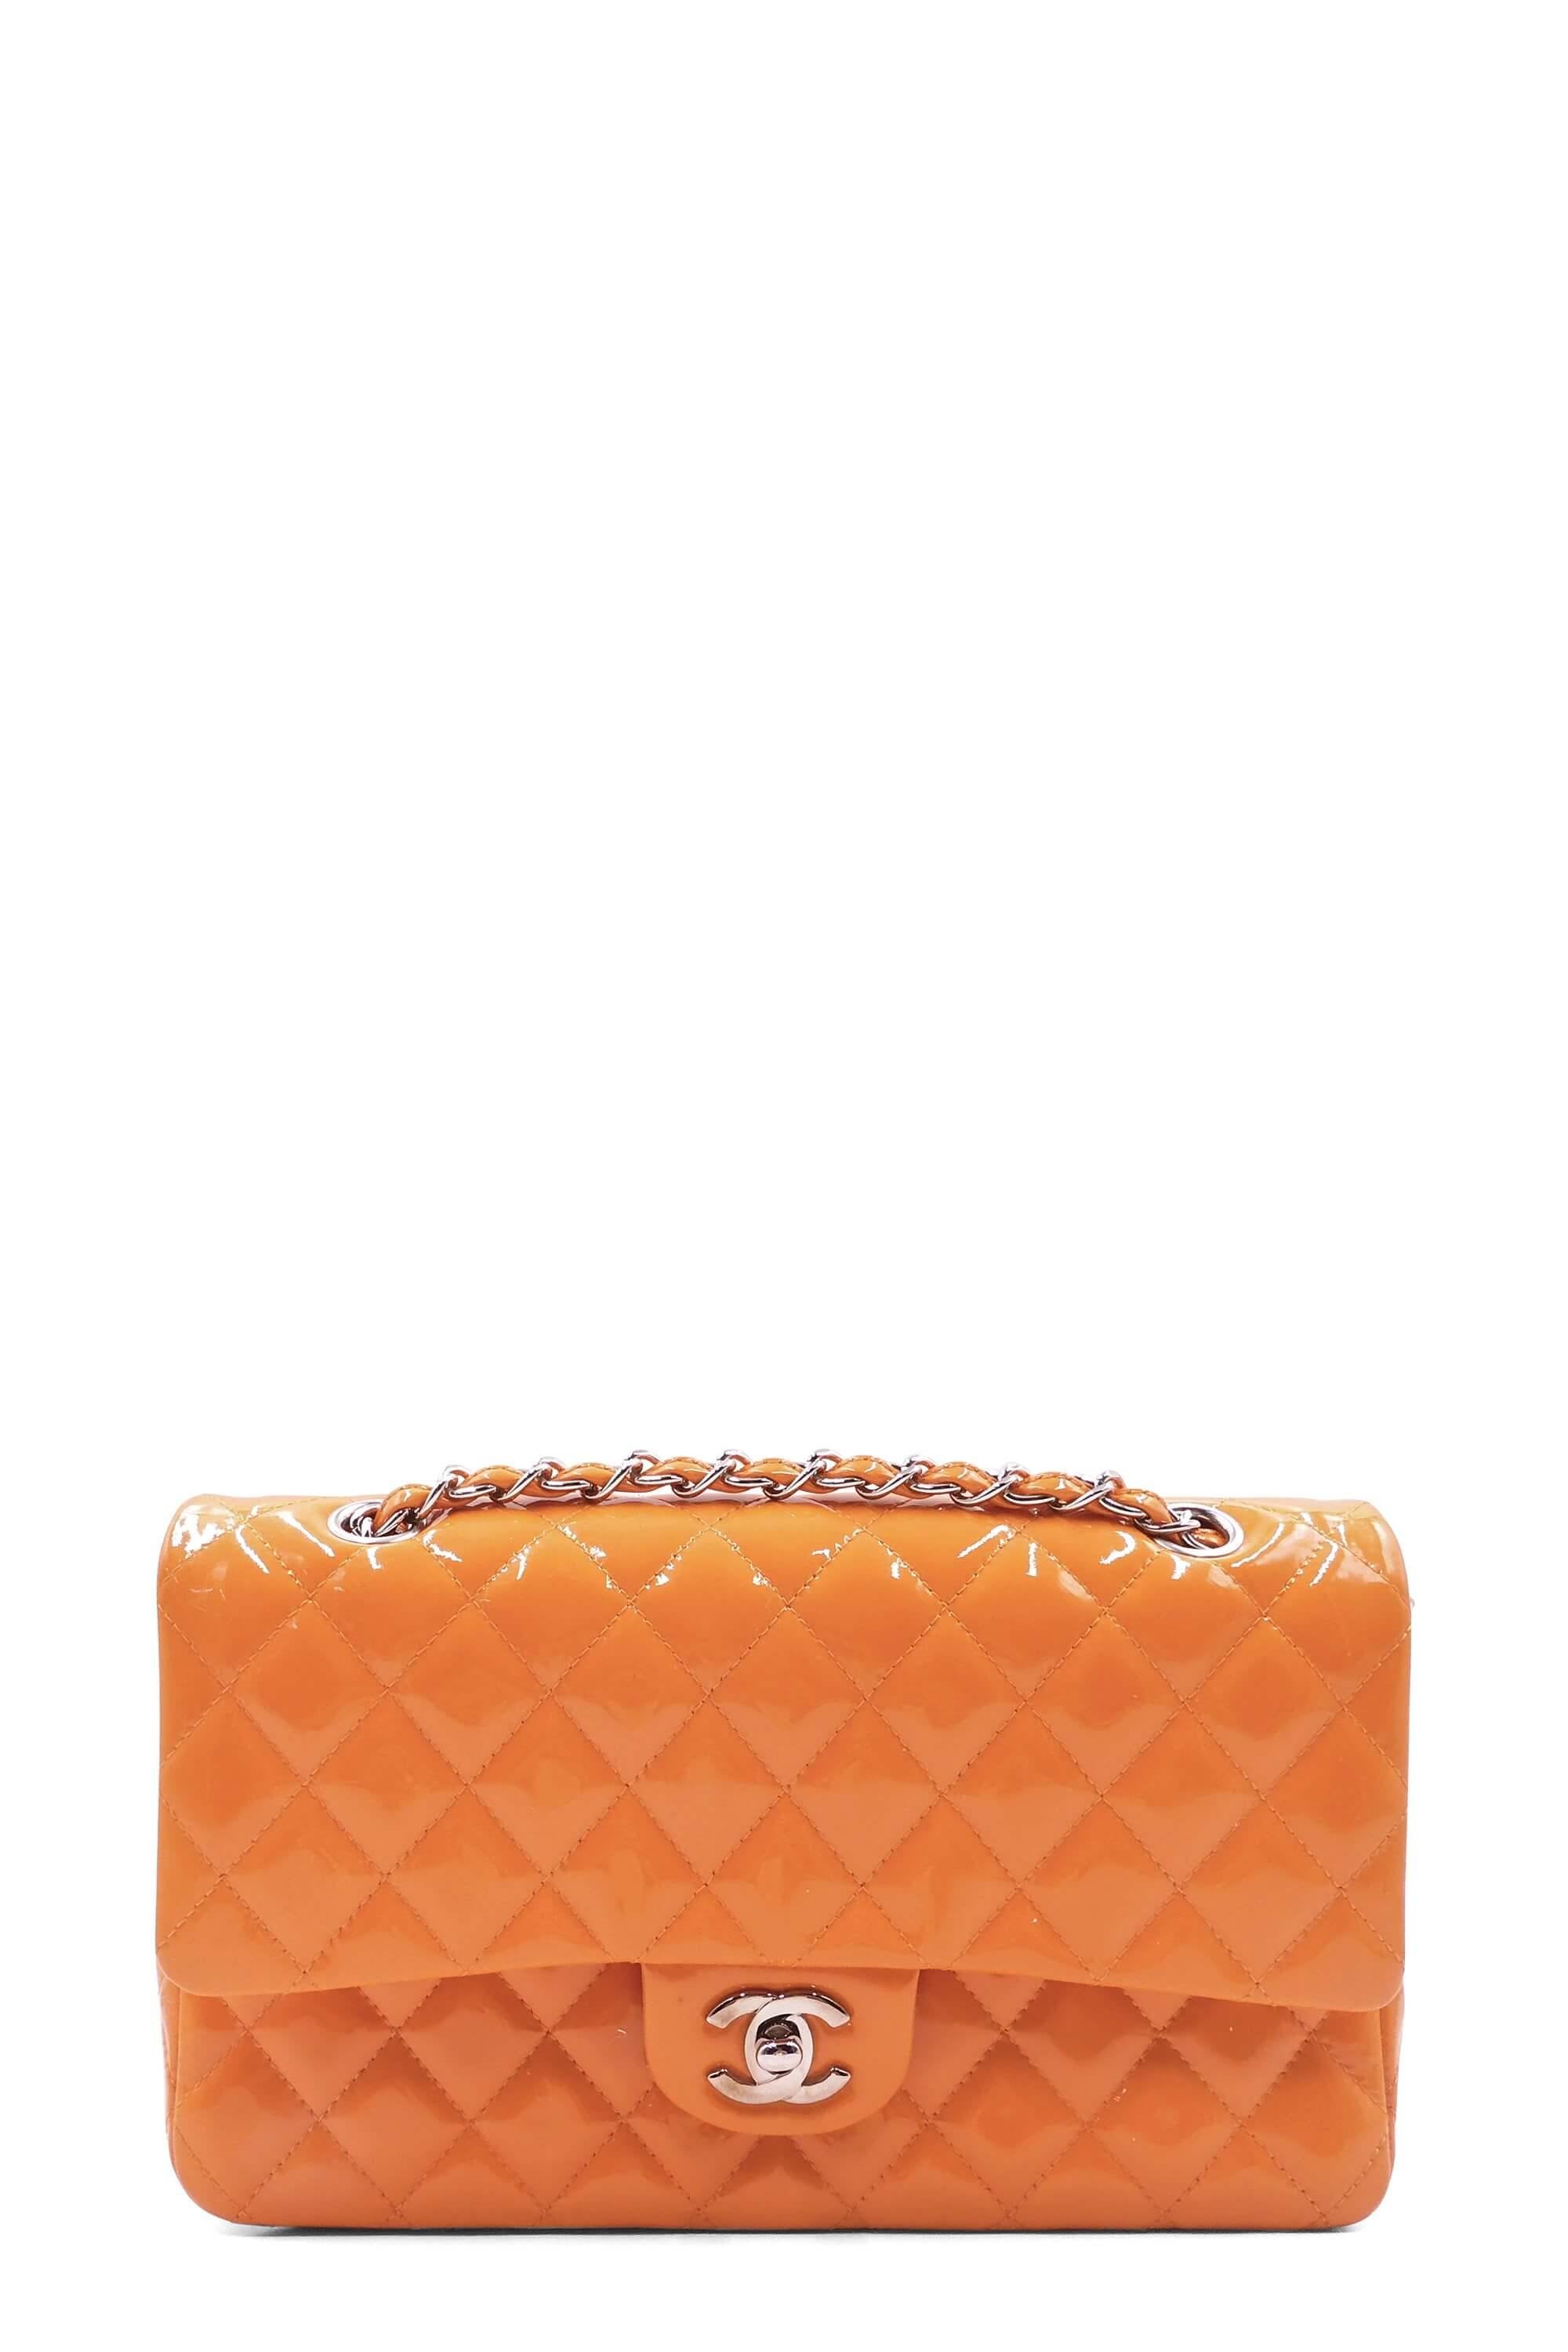 Chanel Orange Quilted Patent Leather Classic Jumbo Double Flap Bag   Yoogis Closet